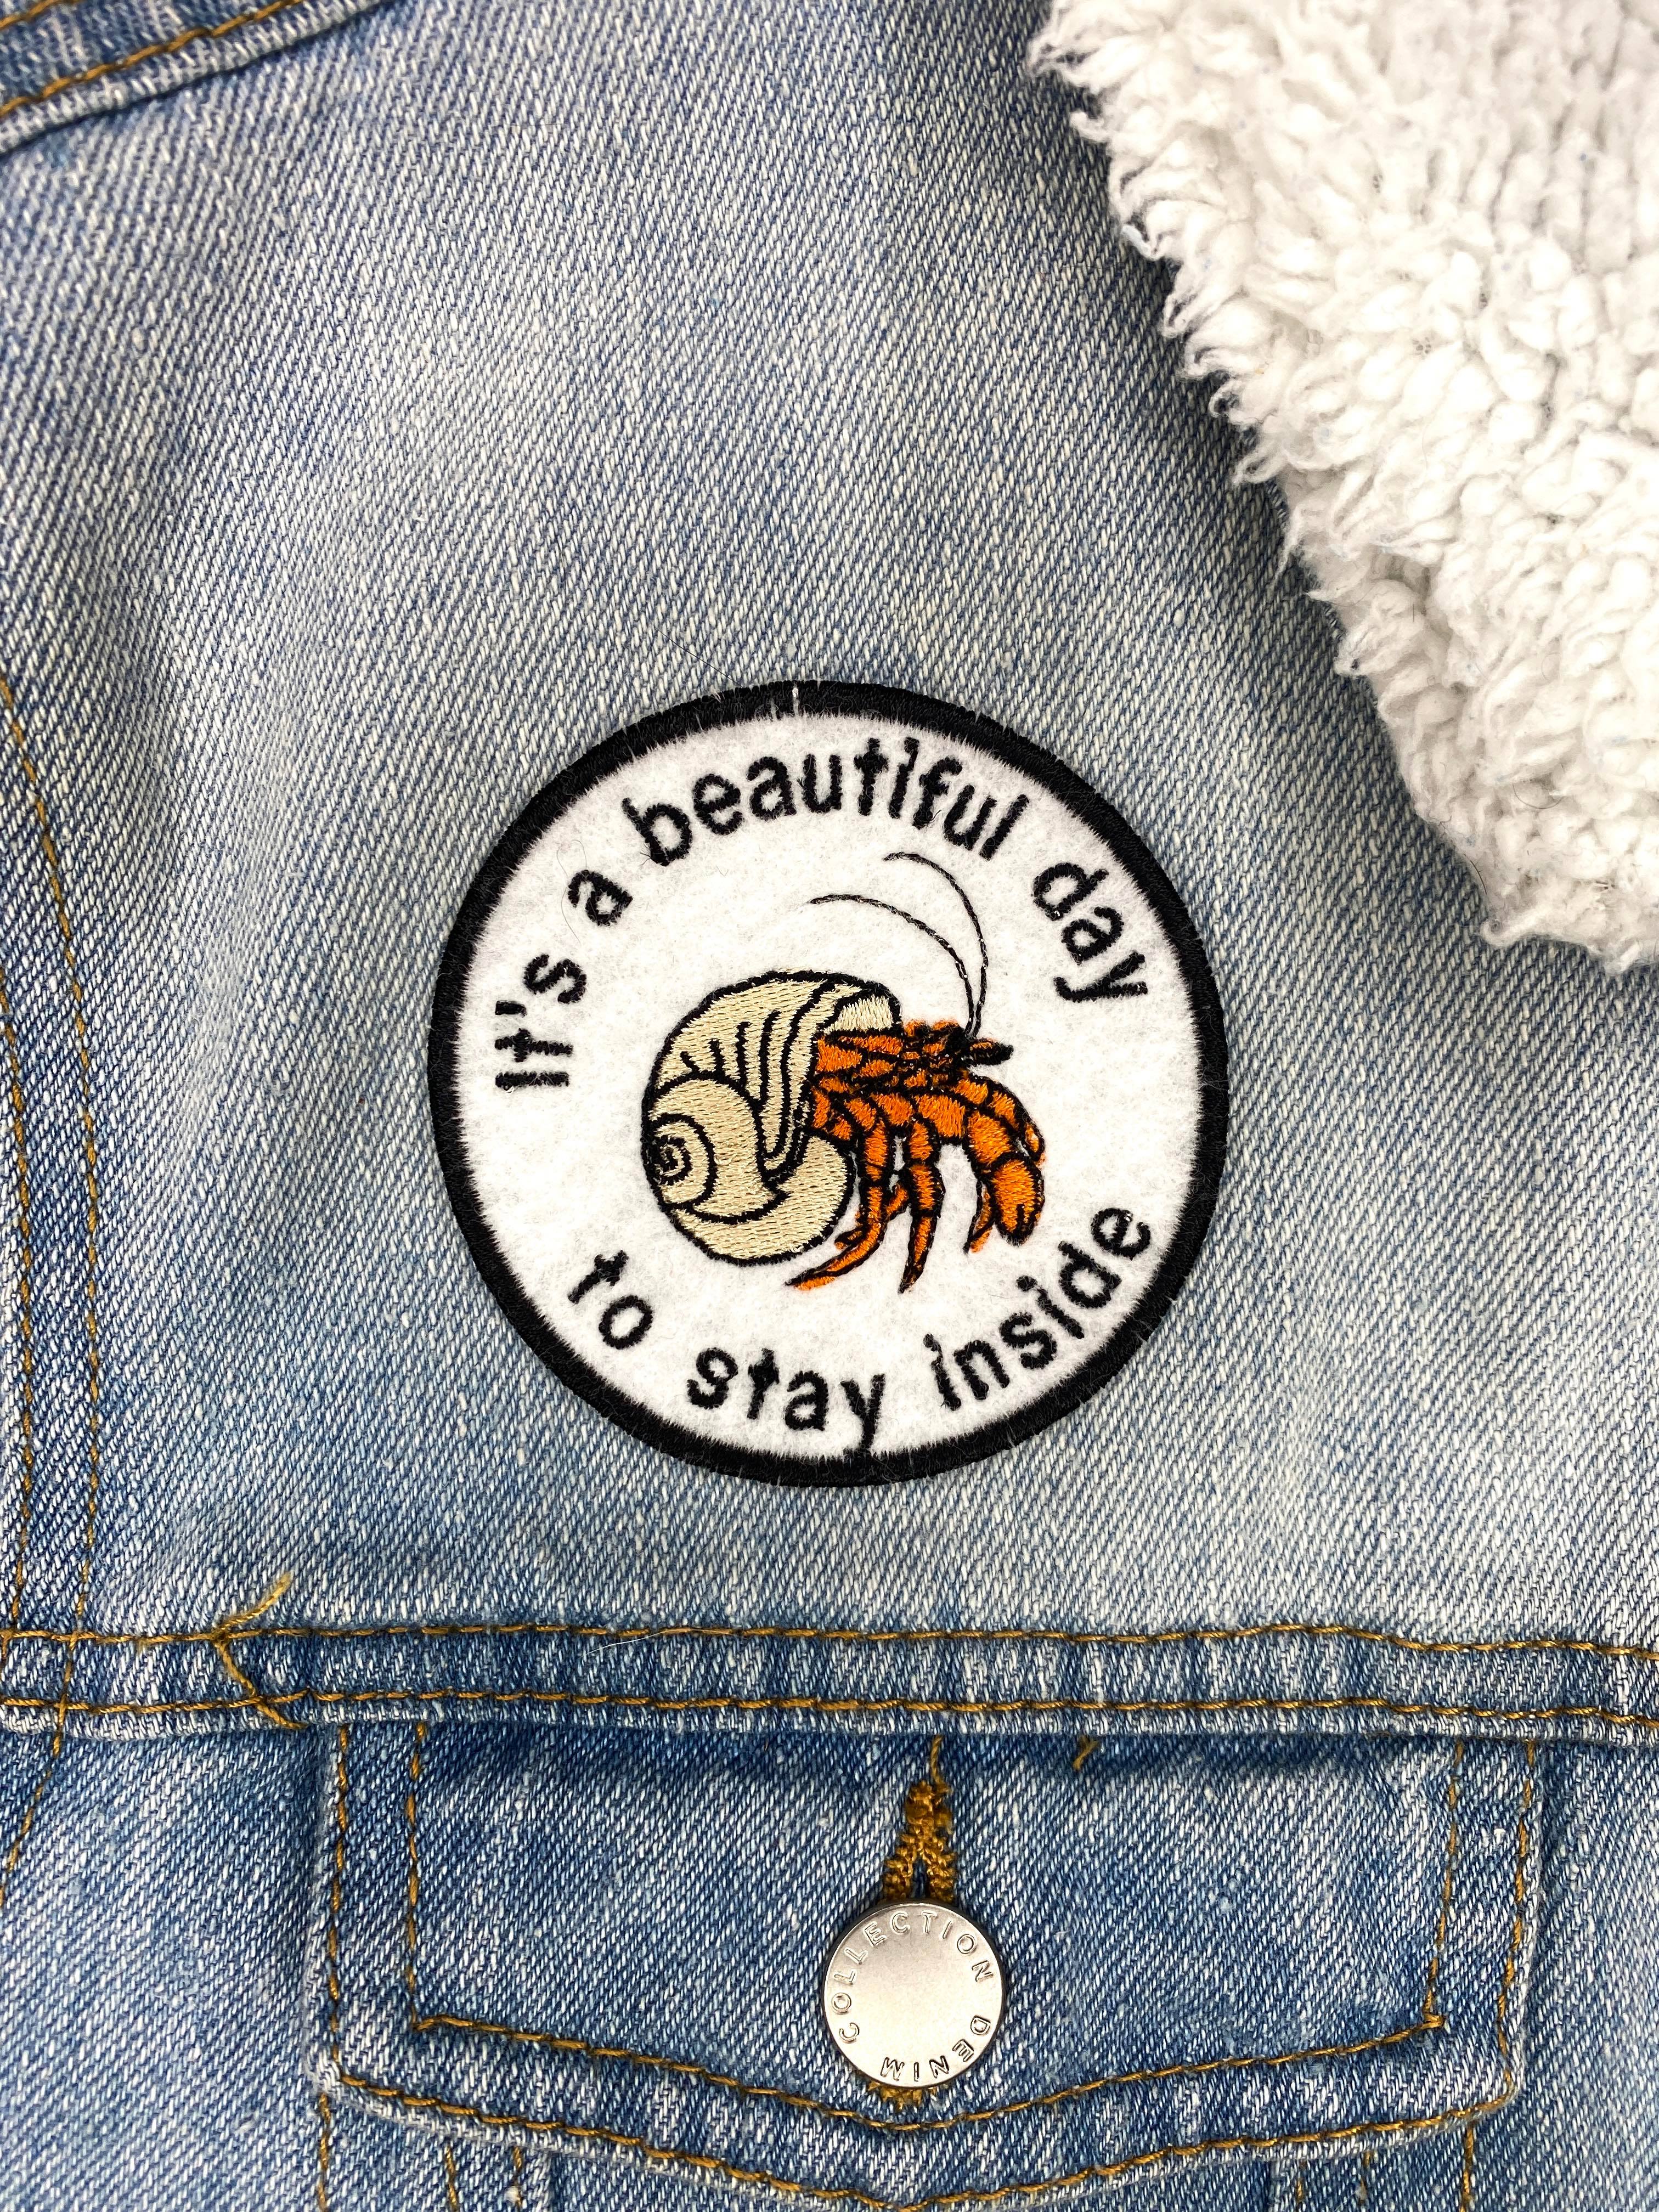 Inside Hermit Crab Embroidered Iron-on Patch